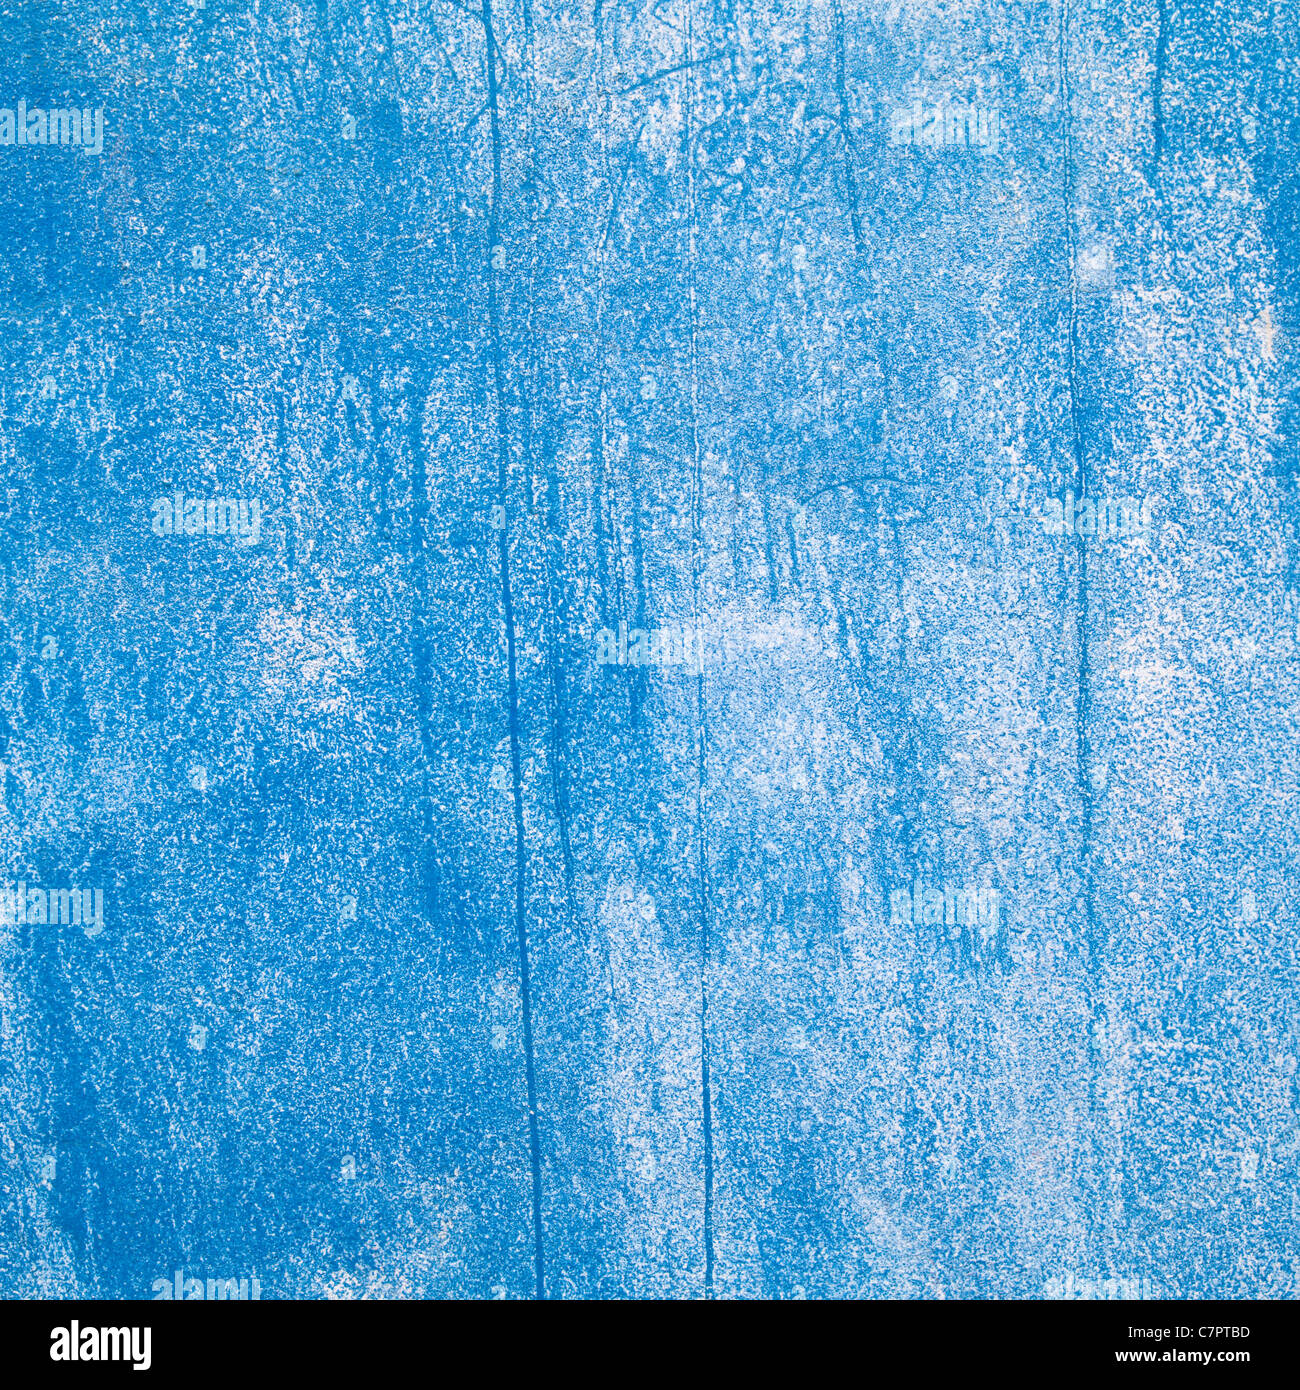 background with blue painted wall Stock Photo